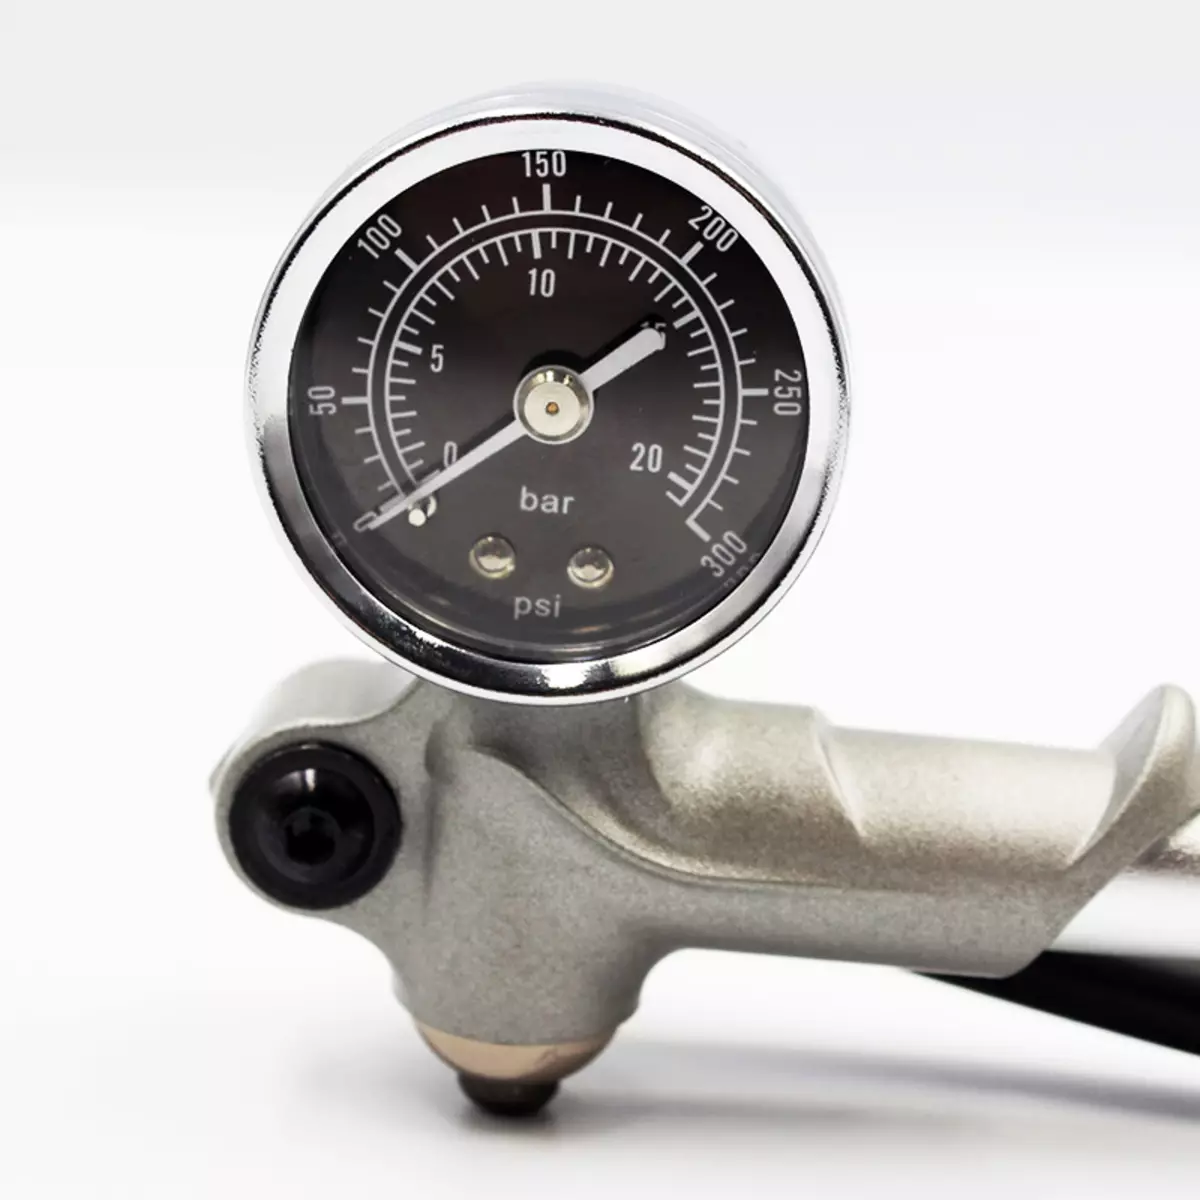 High pressure pumps for a bicycle: wallers with pressure gauge for pumps, shock absorbers and other models of cycling pumps 8499_5